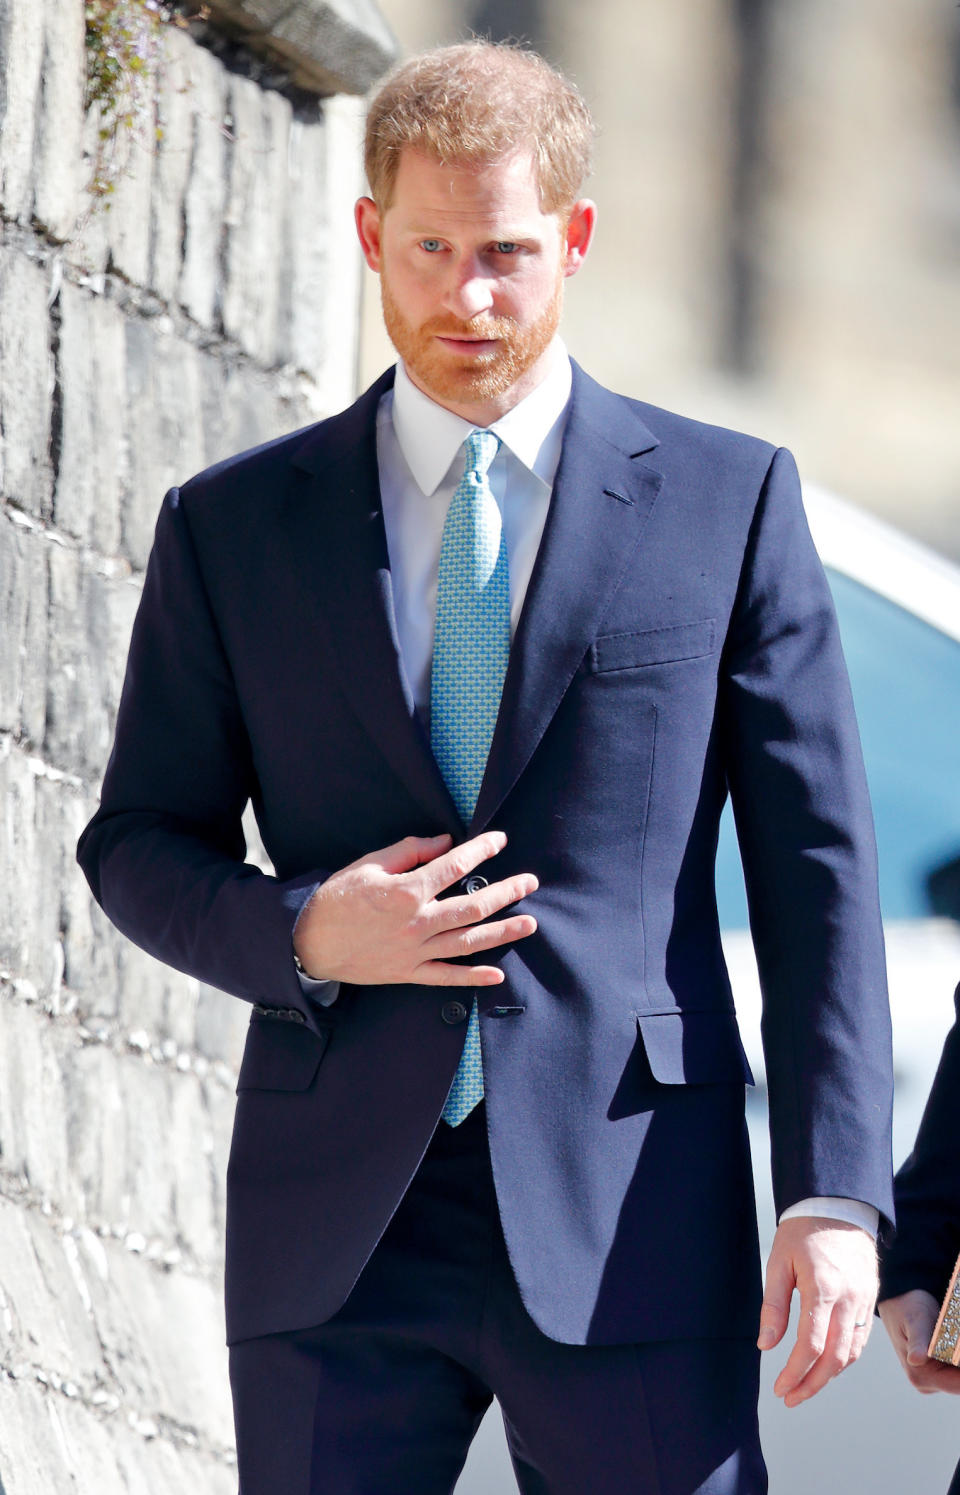 WINDSOR, UNITED KINGDOM - APRIL 21: (EMBARGOED FOR PUBLICATION IN UK NEWSPAPERS UNTIL 24 HOURS AFTER CREATE DATE AND TIME) Prince Harry, Duke of Sussex attends the traditional Easter Sunday church service at St George's Chapel, Windsor Castle on April 21, 2019 in Windsor, England. Easter Sunday this year coincides with Queen Elizabeth II's 93rd birthday. (Photo by Max Mumby/Indigo/Getty Images)